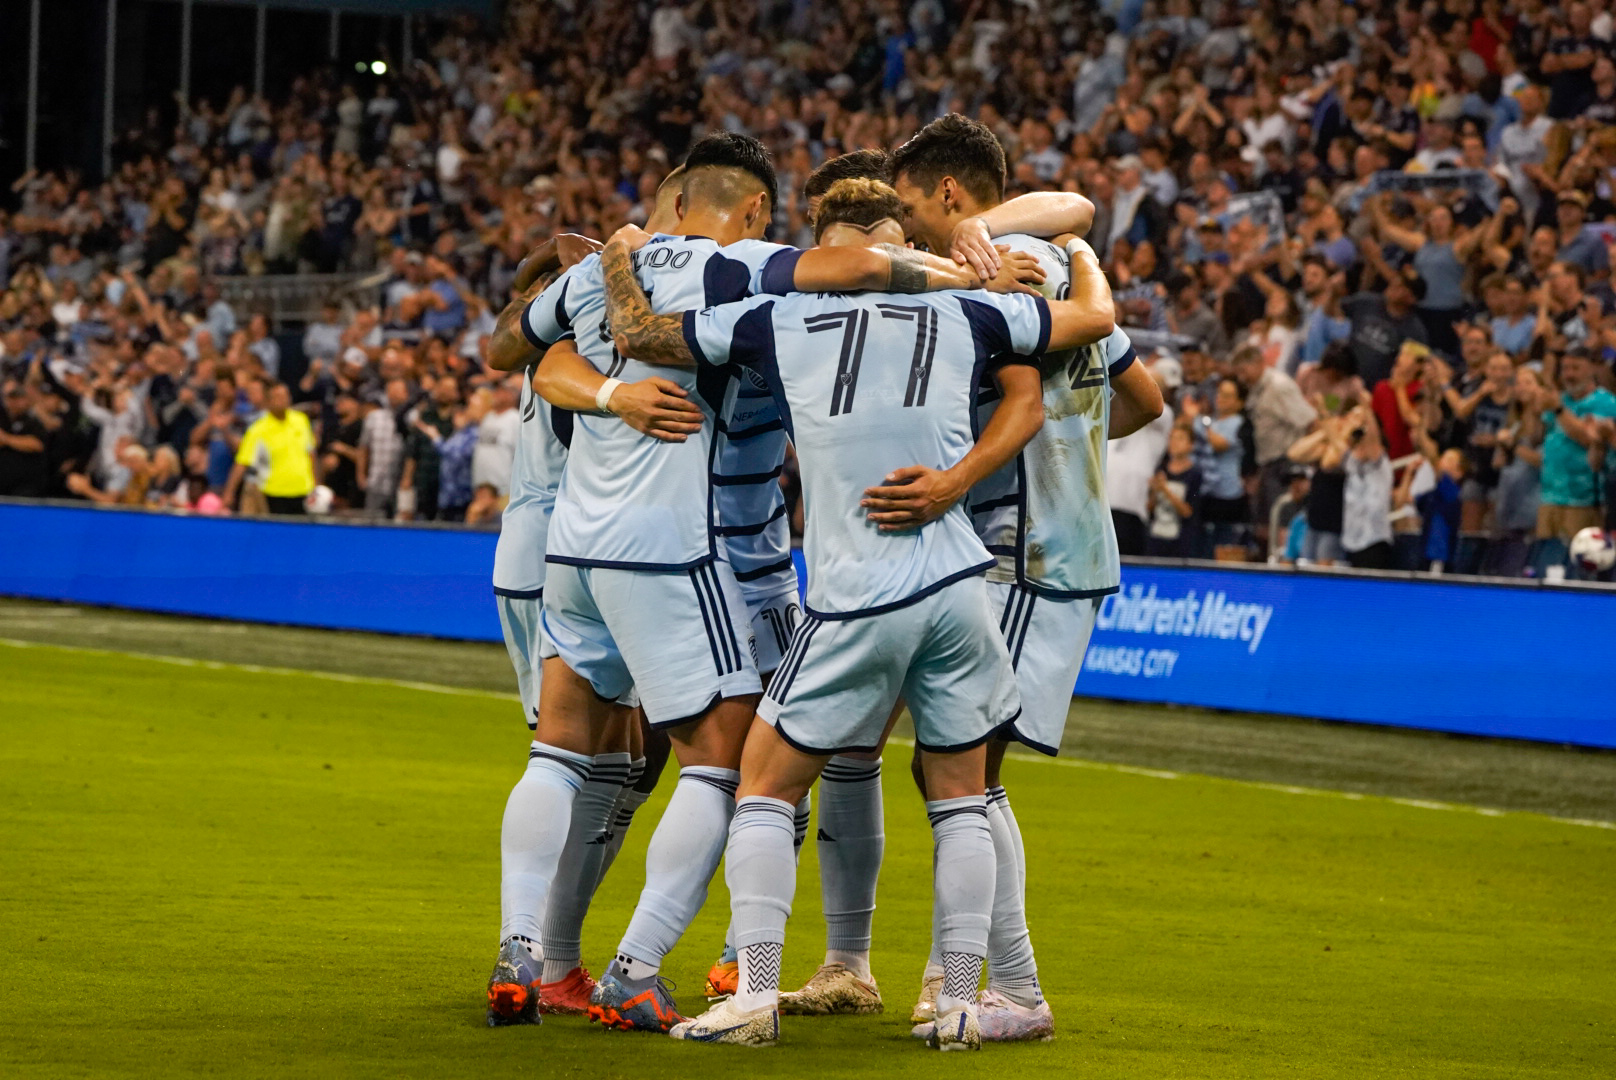 Sporting KC celebrates a goal with the wiggles.